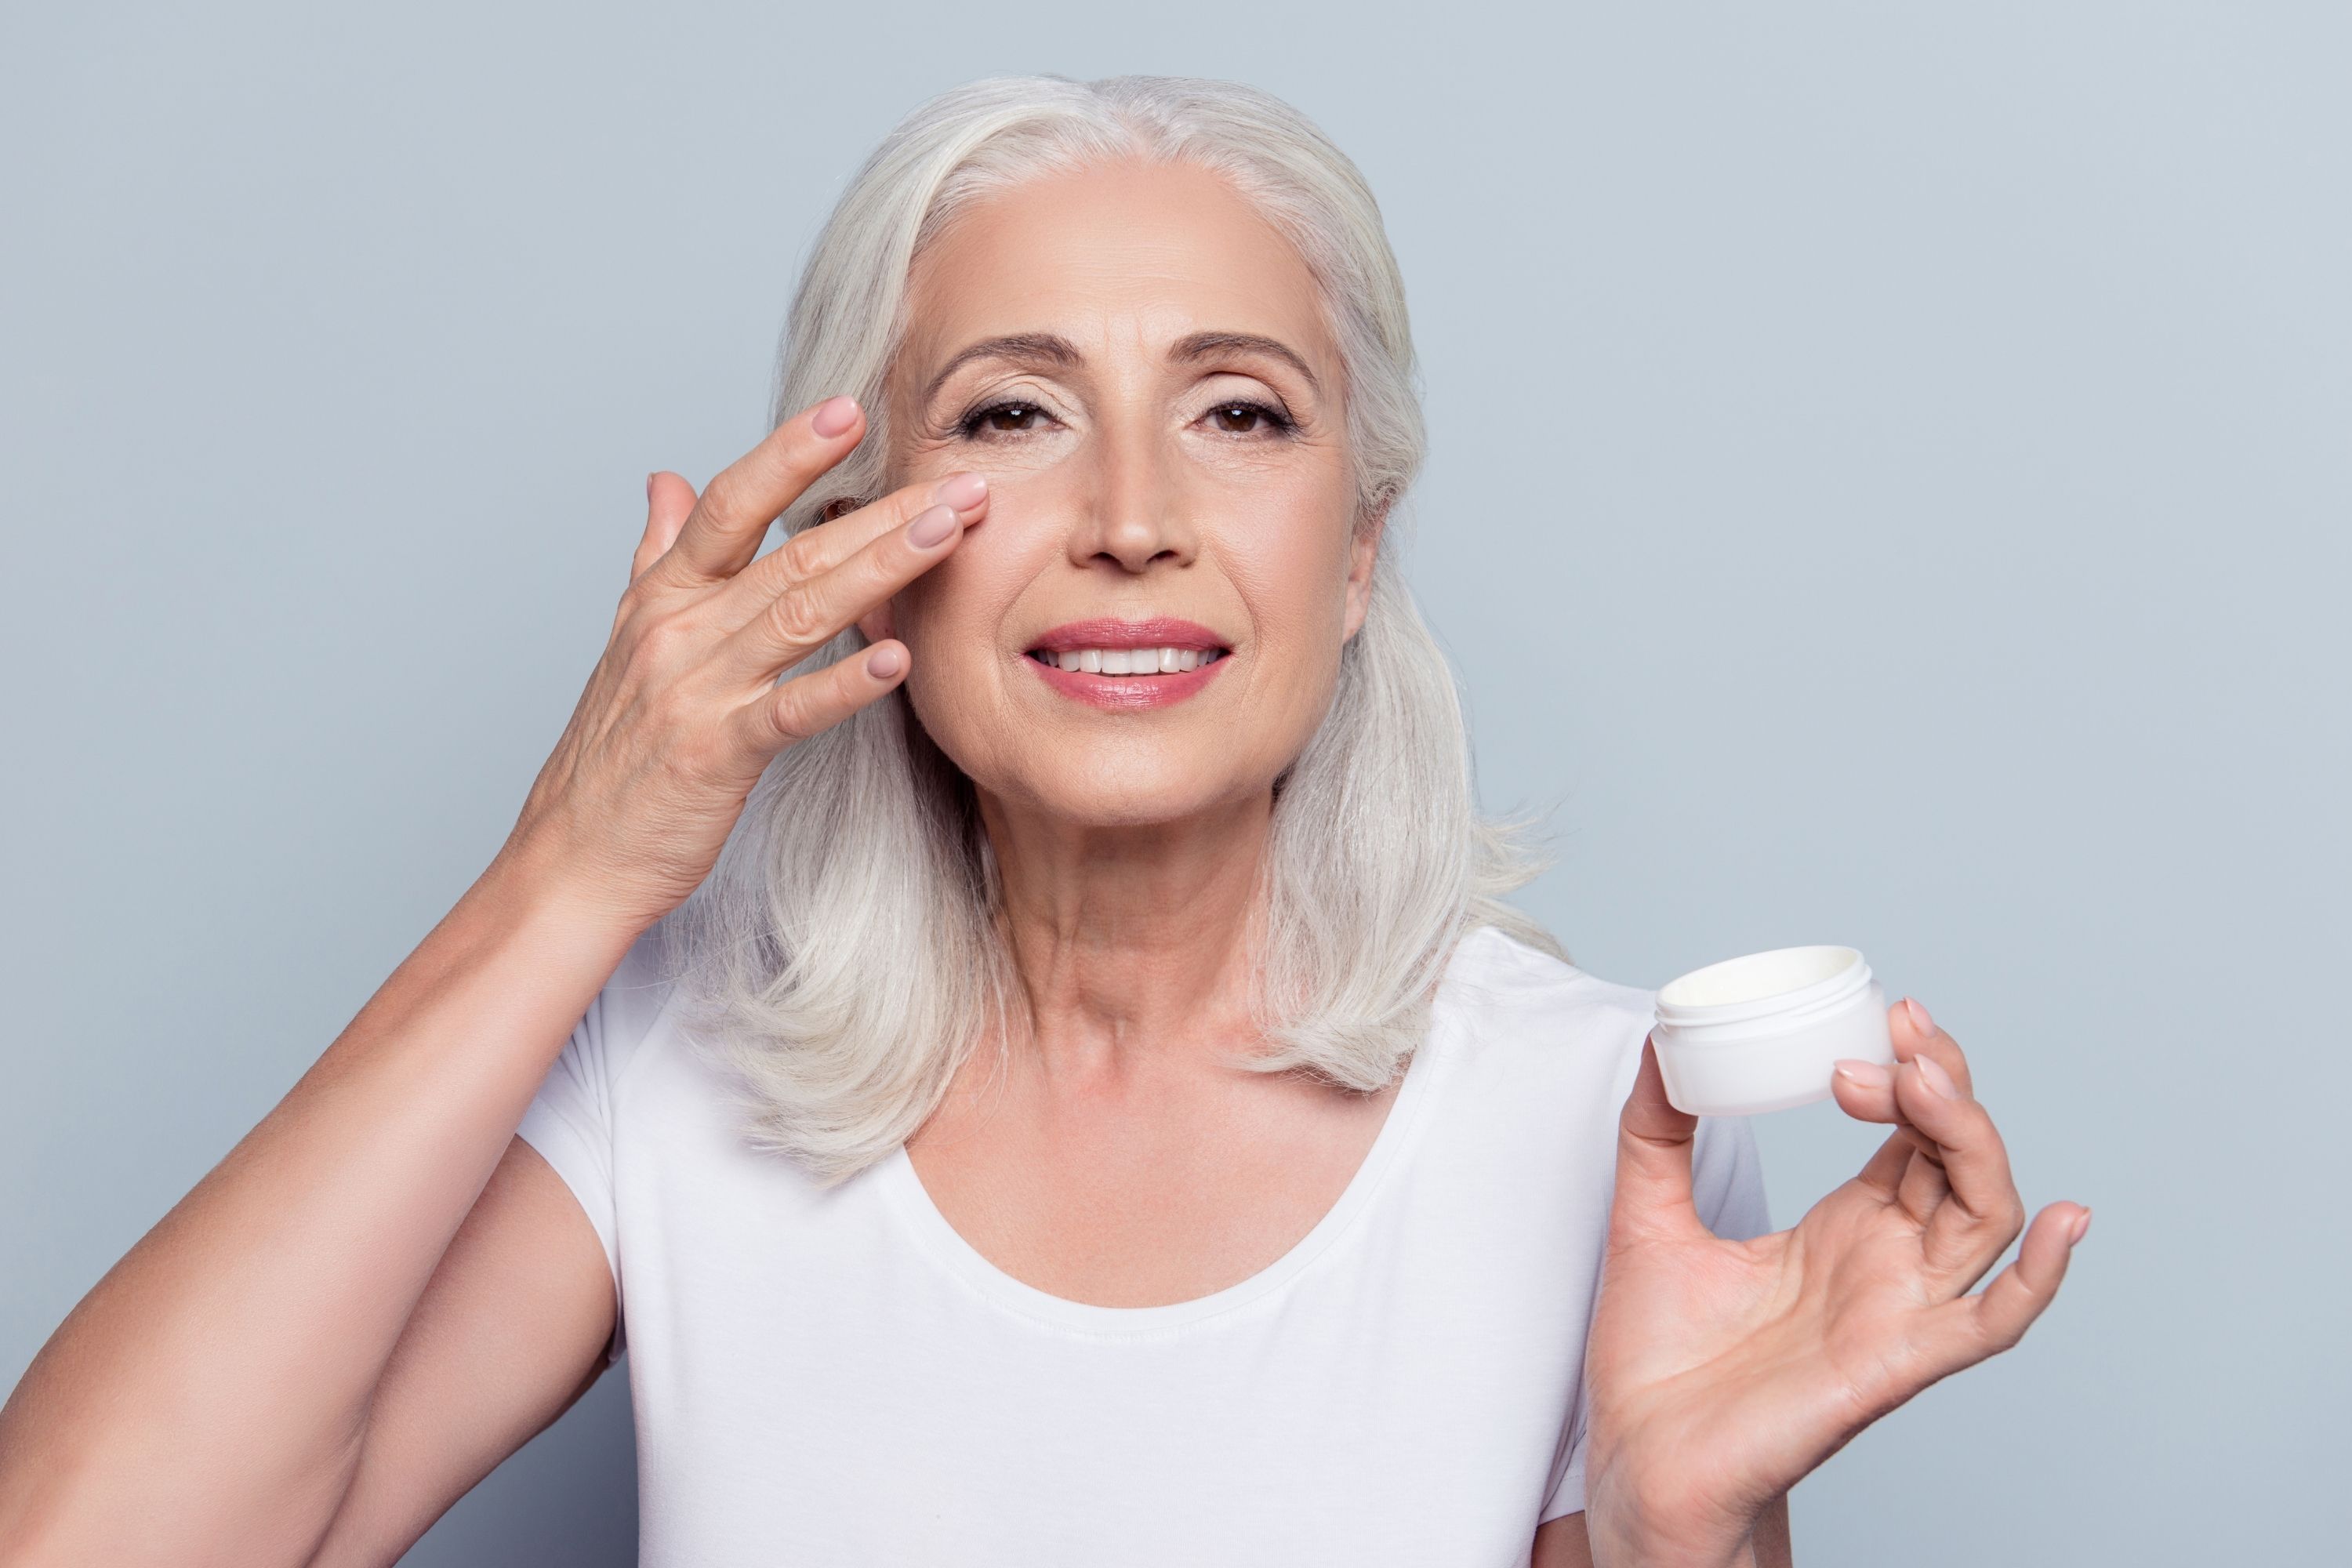 How to get rid of wrinkles with an eye cream